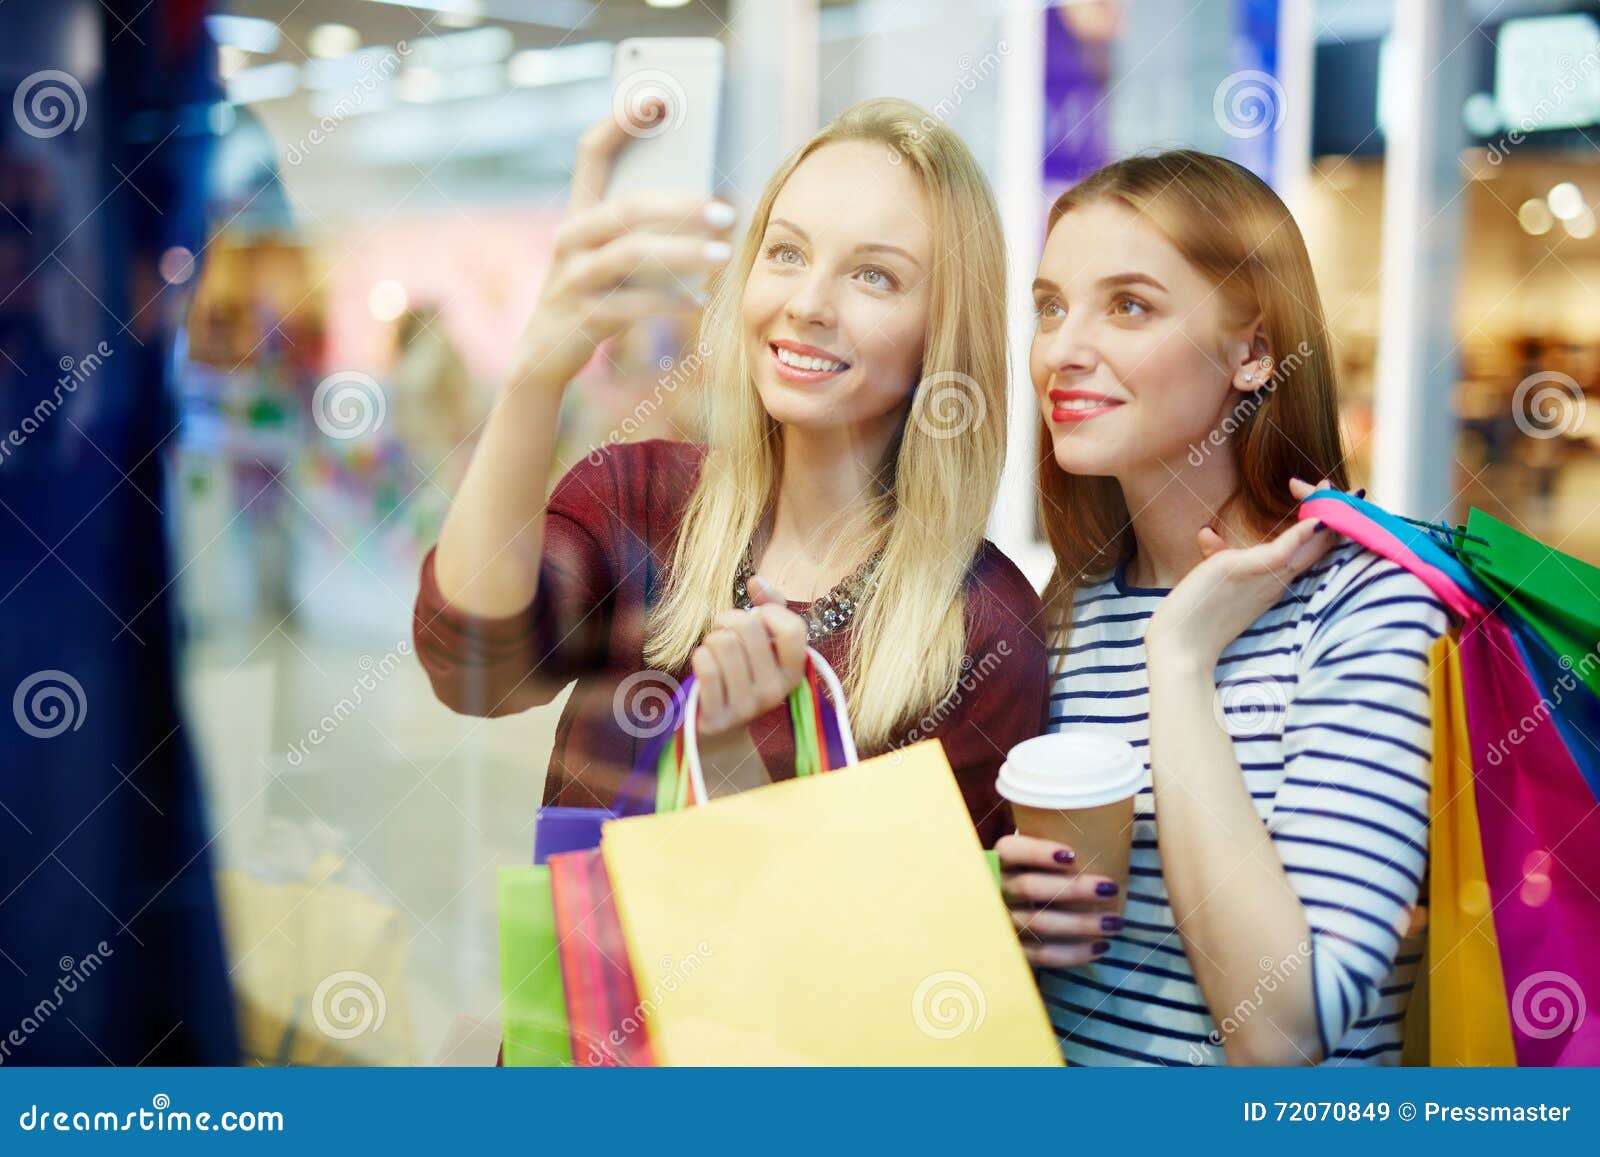 Selfie in shopping mall stock image. Image of young, portrait - 72070849